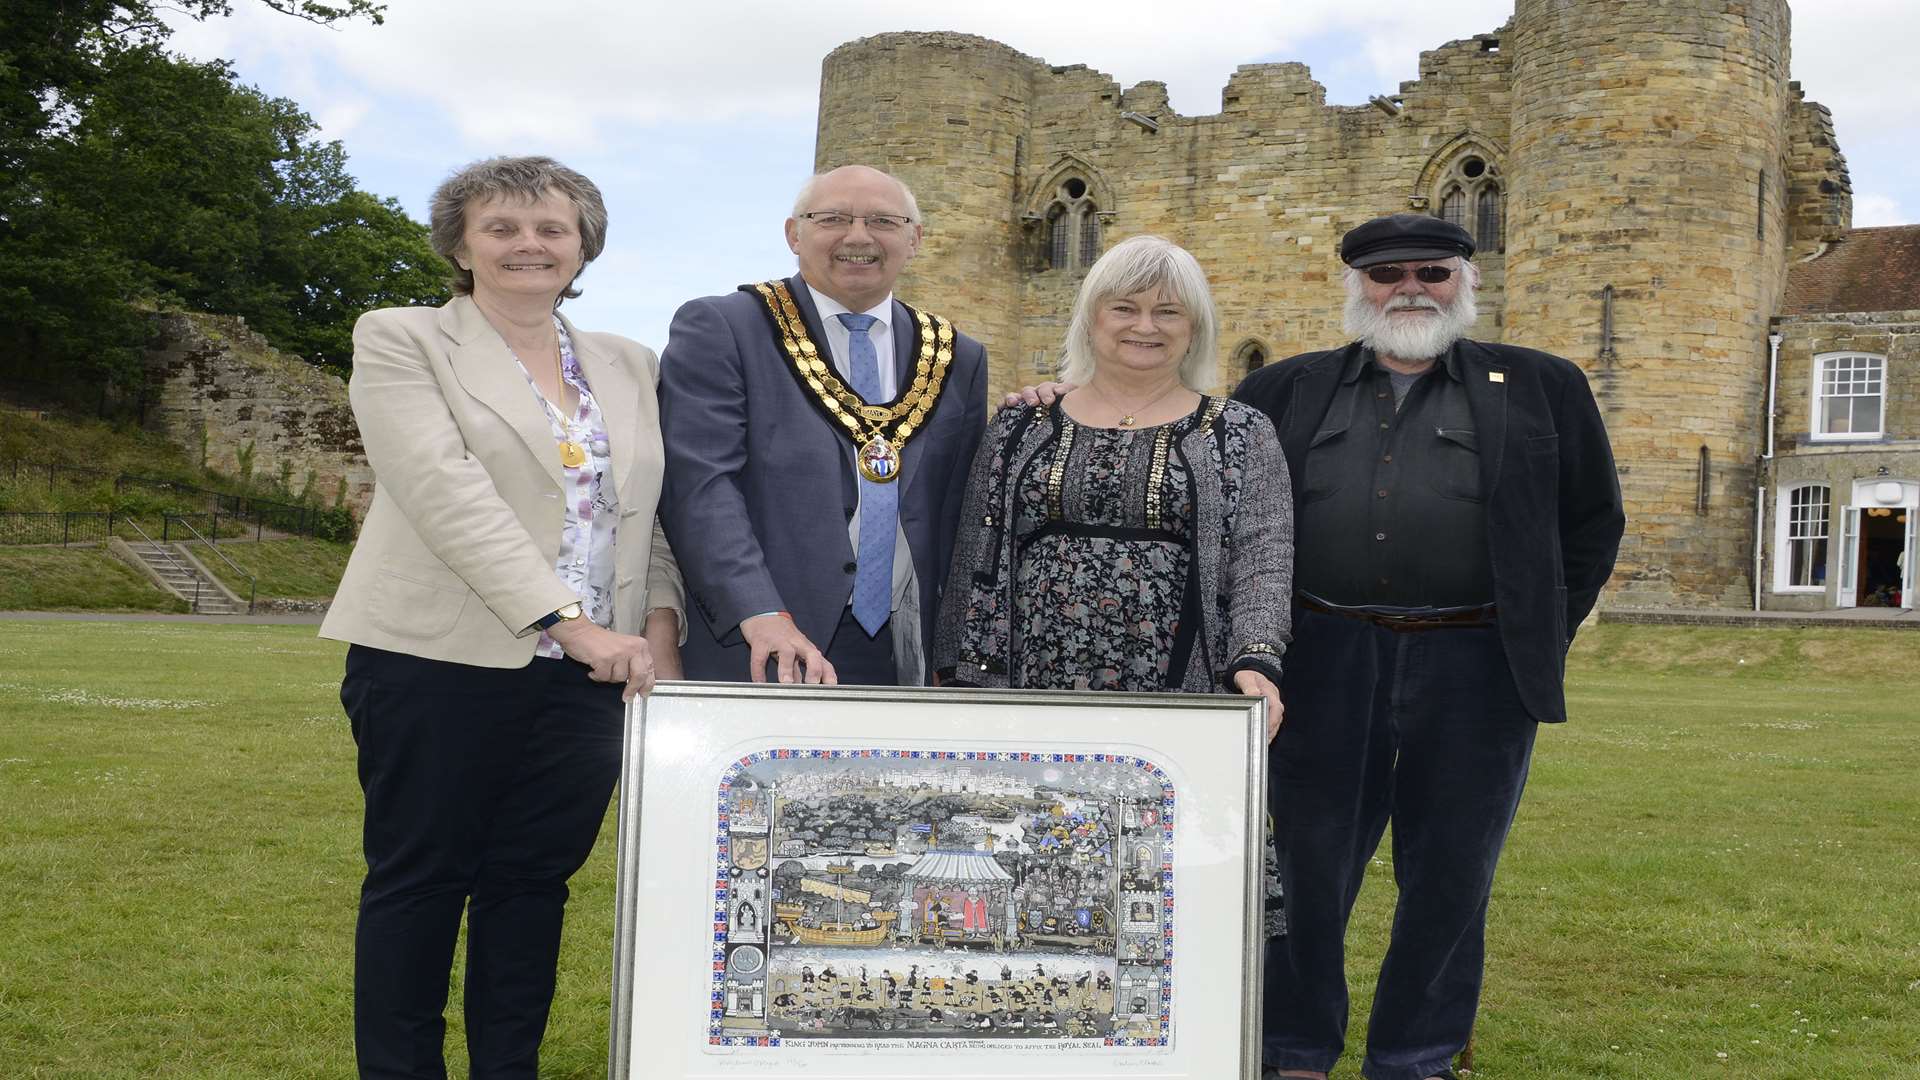 Artist Graham Clarke hands over an Etching to commemorate the 800th annivesary of sealing of the Magna Carta. From left: Mayoress Christine Baldock Tonbridge Mayor Cllr Owen Baldock Mrs Wendy Clarke and Graham Clarke. Picture by Paul Amos